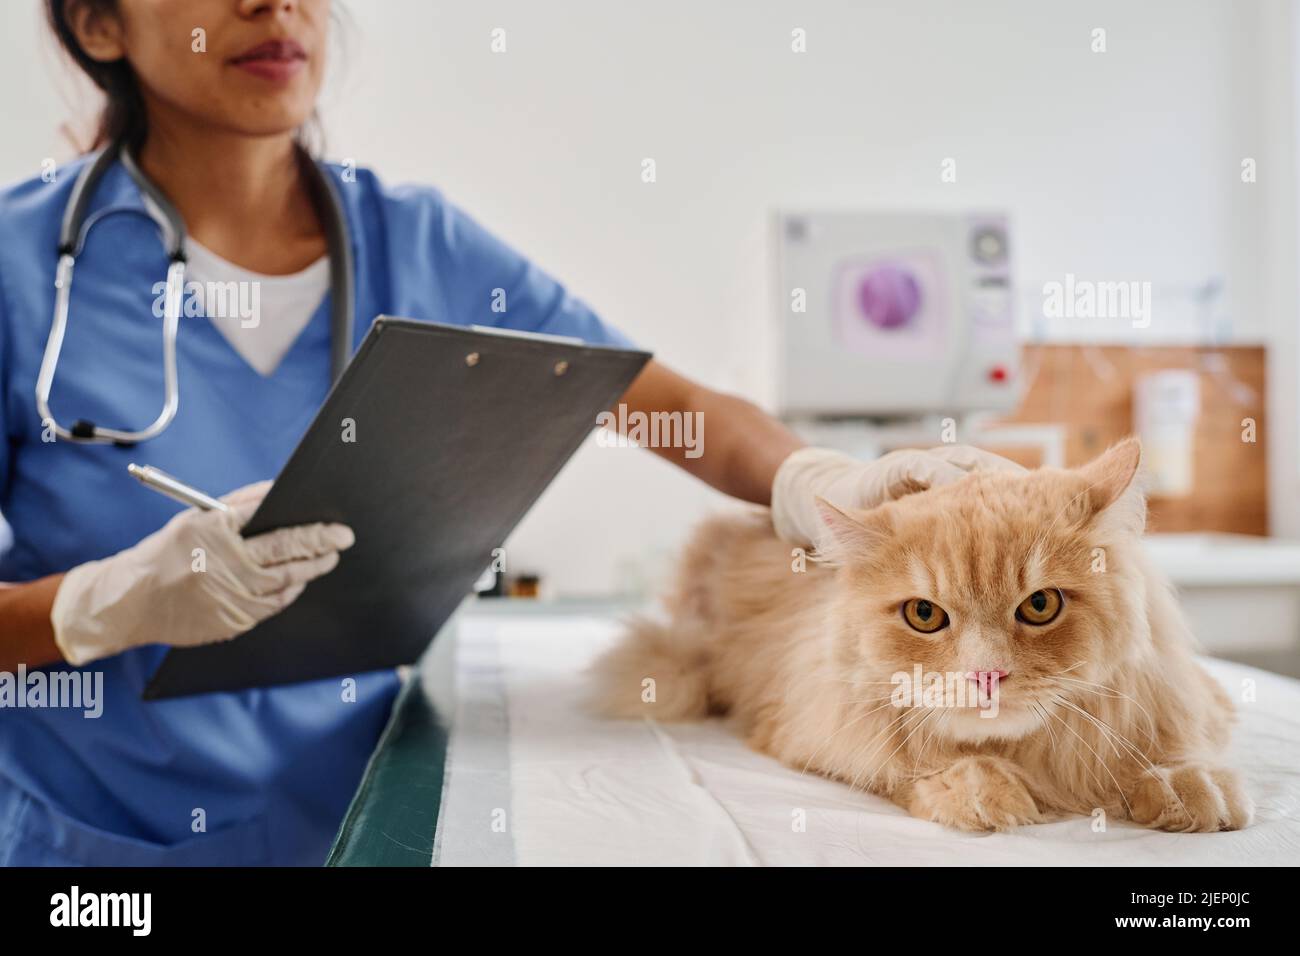 Professional veterinarian holding clipboard with medical record palpating cats body during health examination Stock Photo